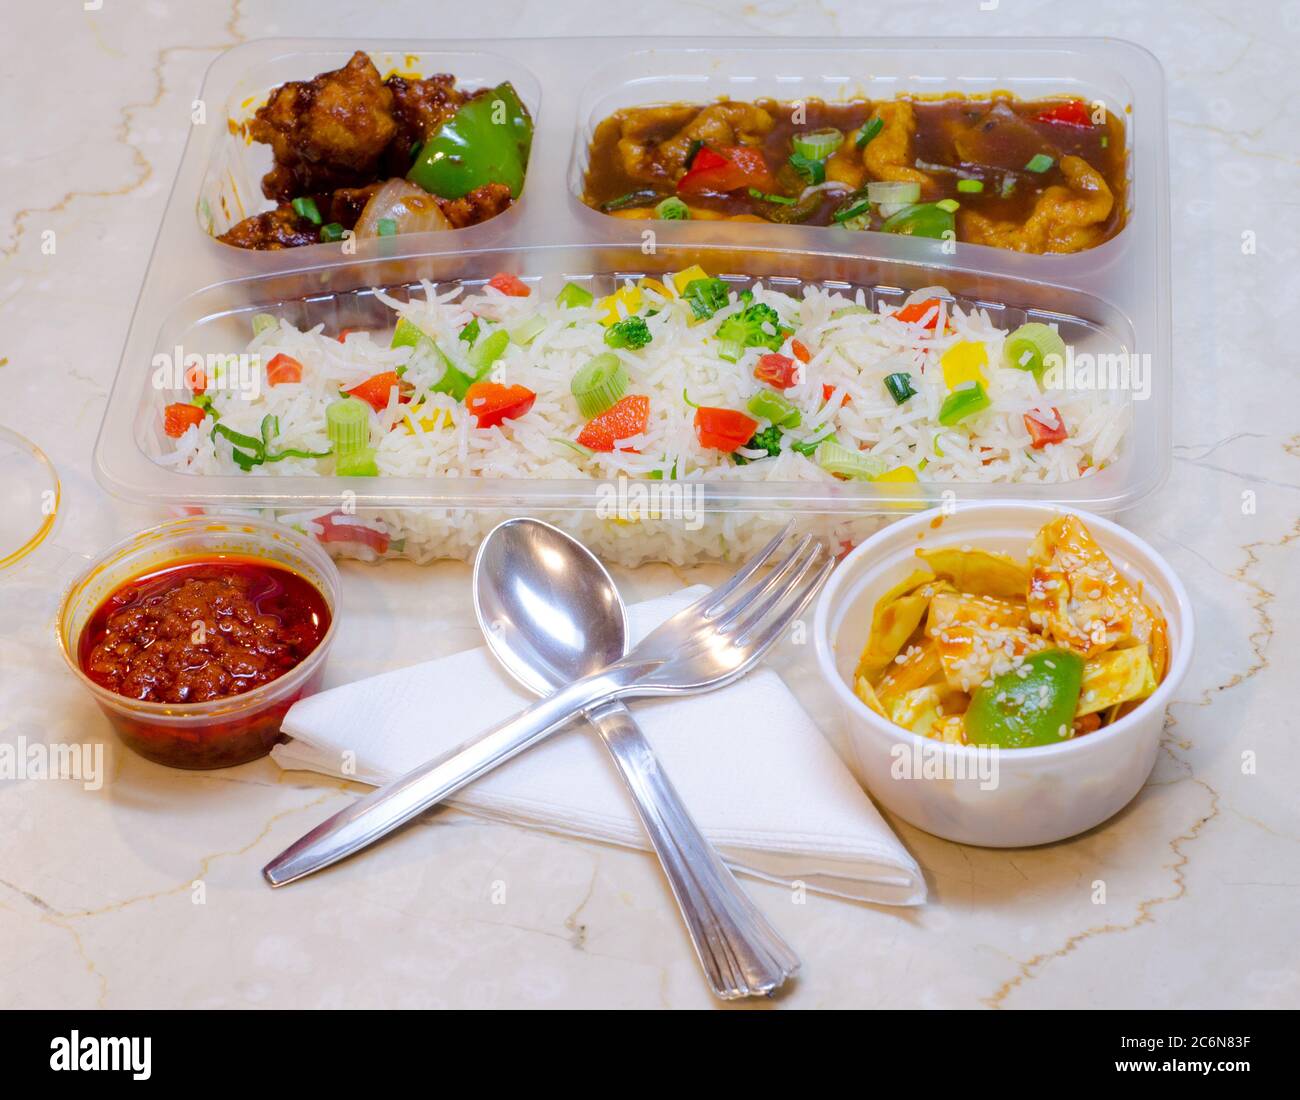 Tasty complete meal with great presentation Stock Photo